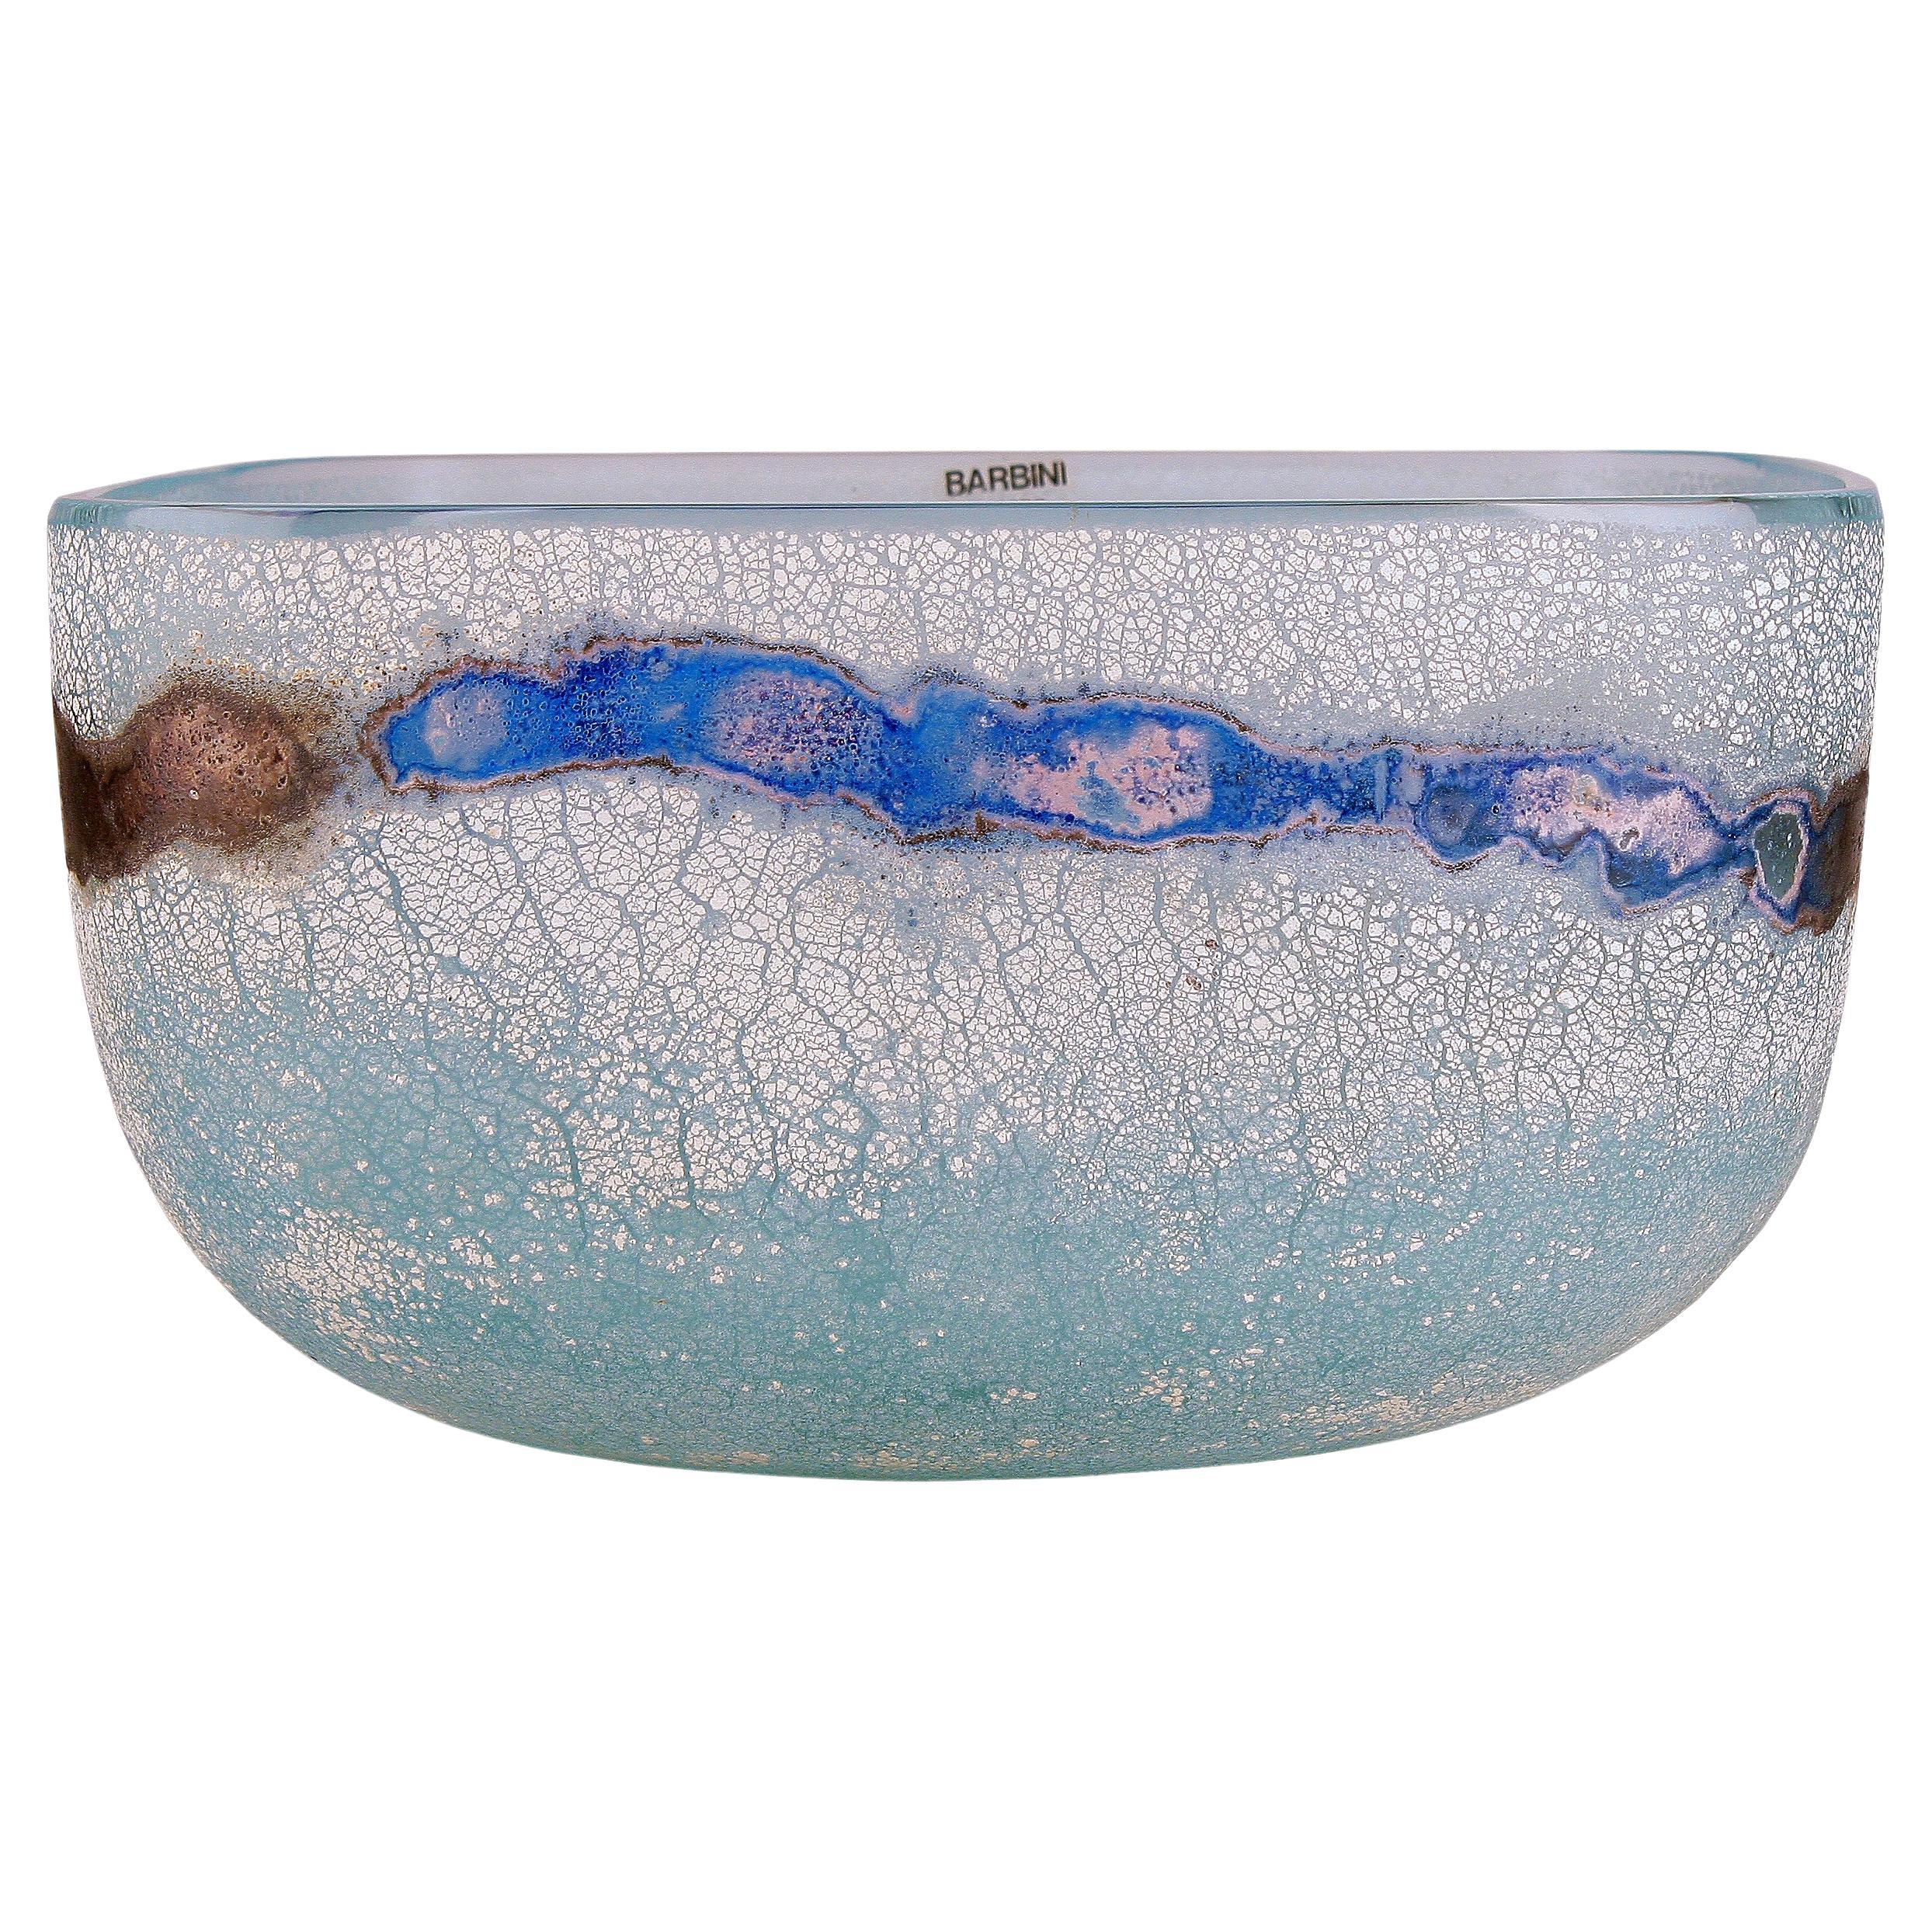 Mid-20th Century Modern Italian Frosted Murano Glass Scavo Bowl by A. Barbini For Sale